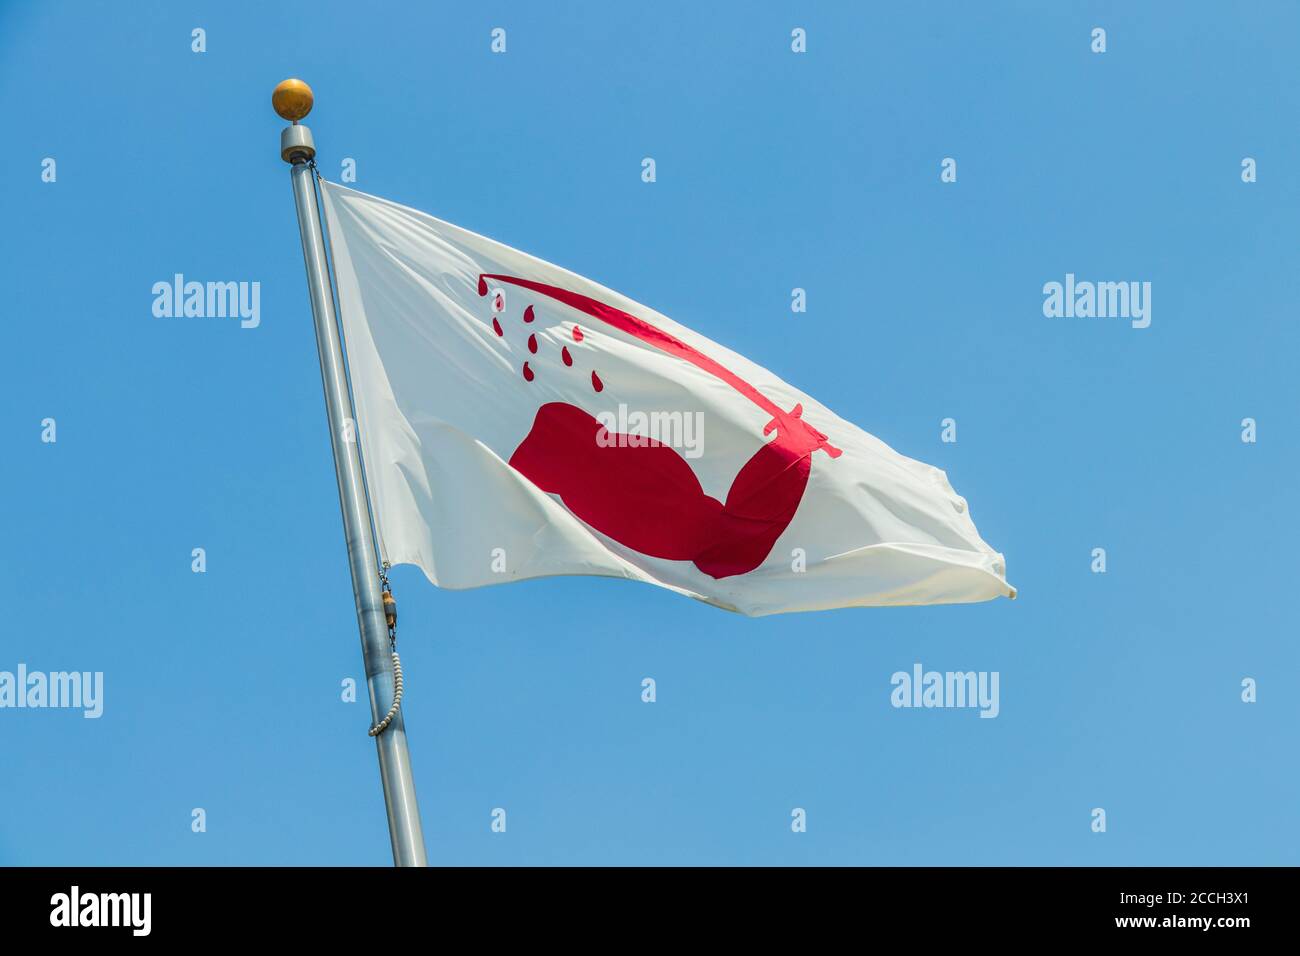 Lone Star Monument und Historical Flags Park (Texas Revolution Flags) in Conroe, Texas. Stockfoto